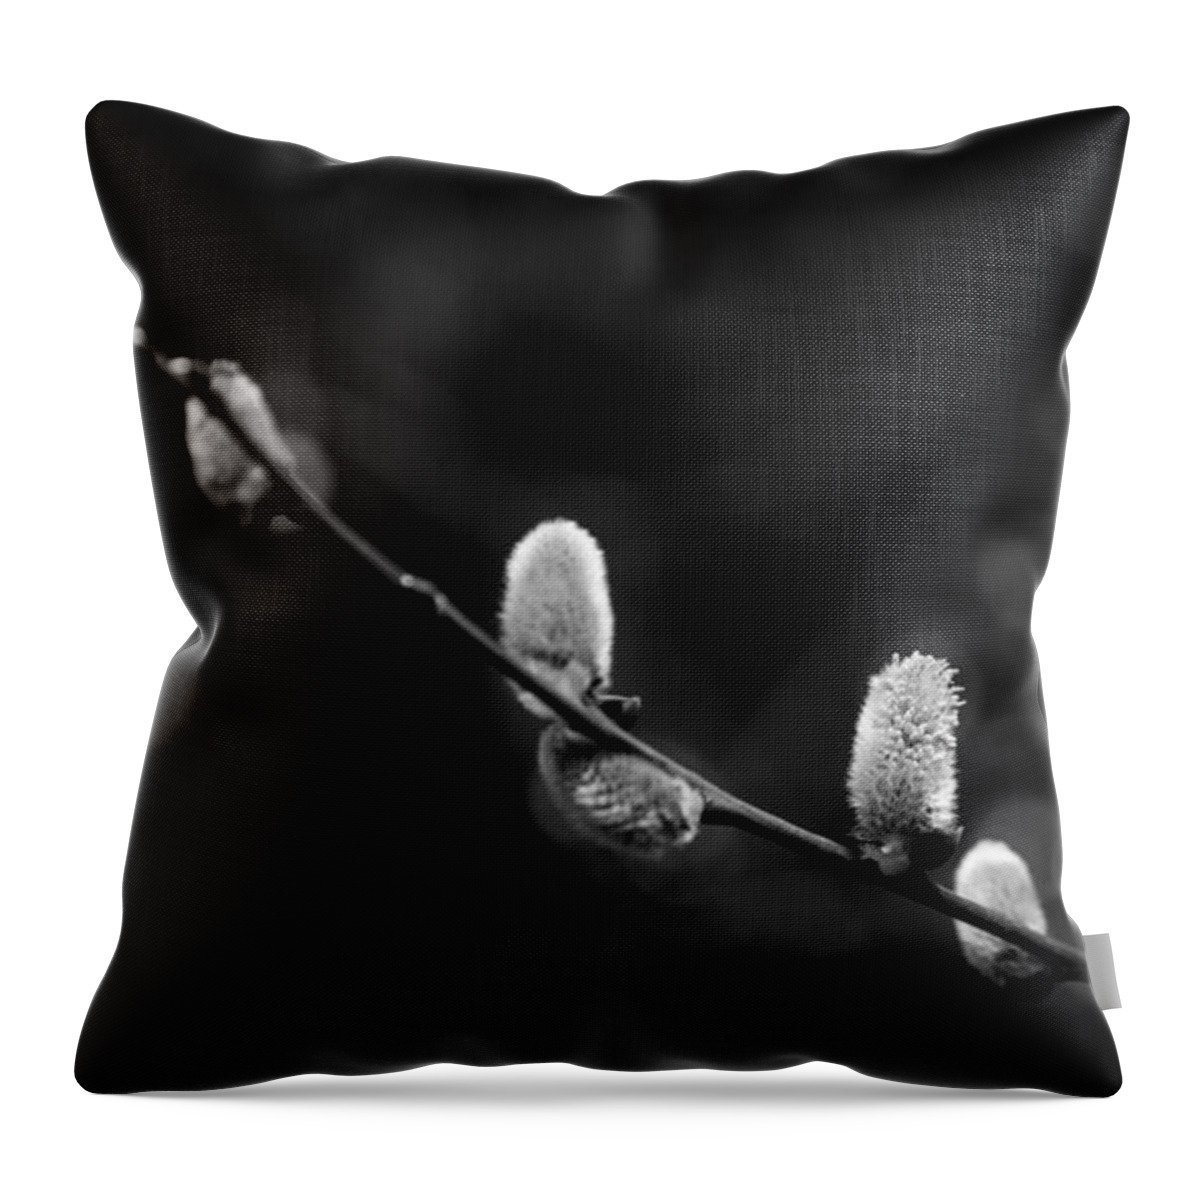 Willow Catkin Throw Pillow featuring the photograph Willow Catkin - Bw by Andreas Levi